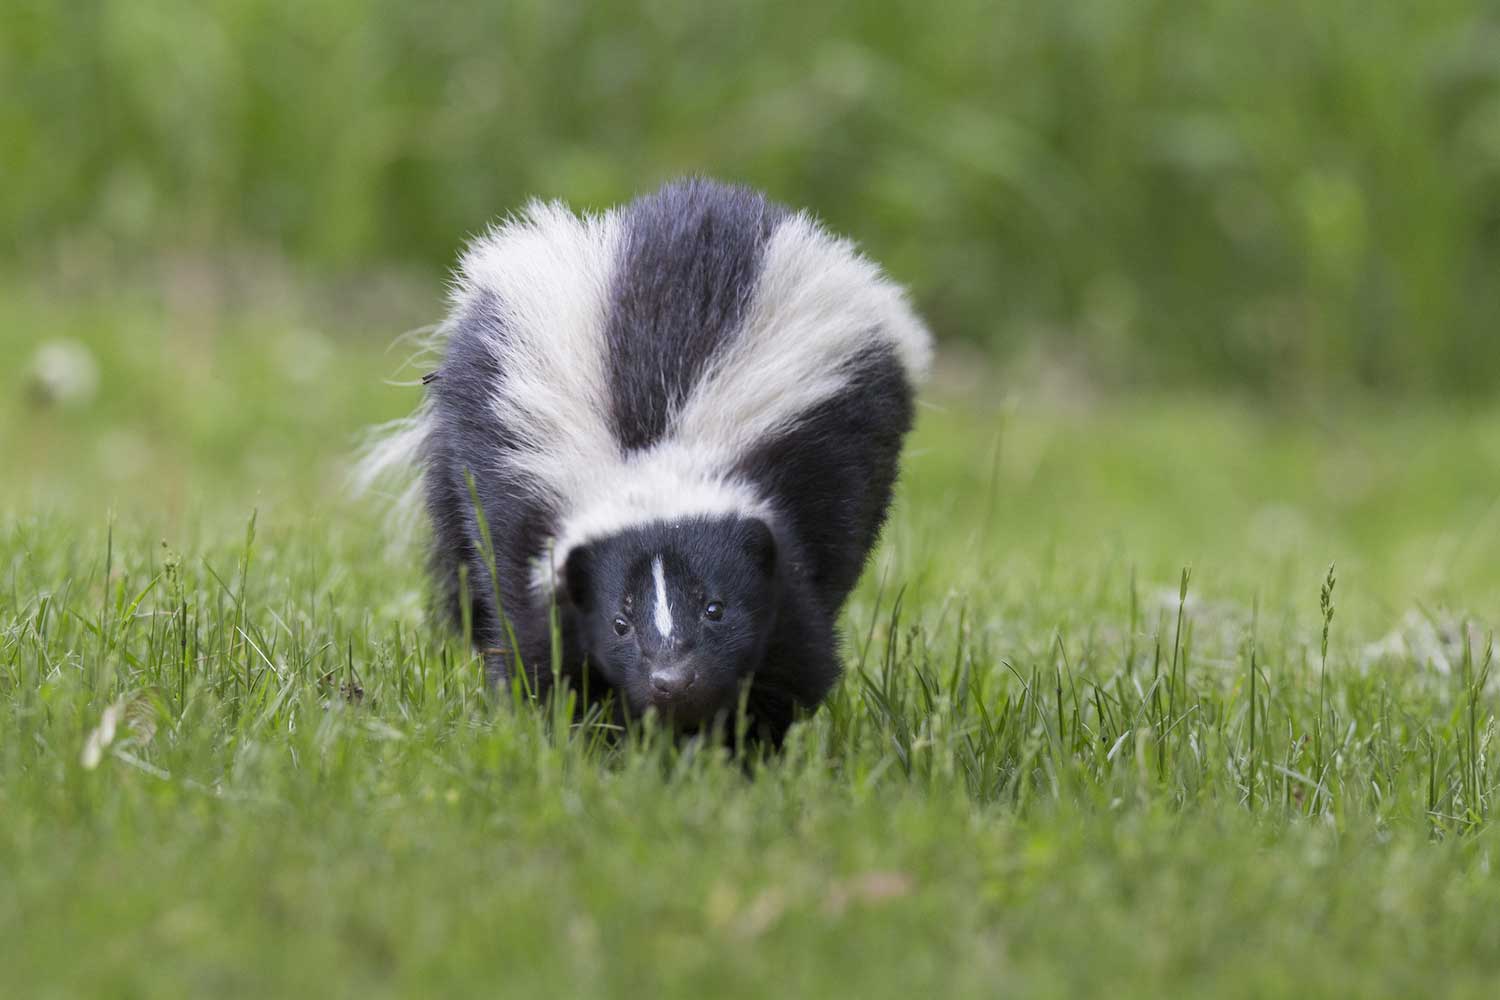 A skunk walking in the grass.